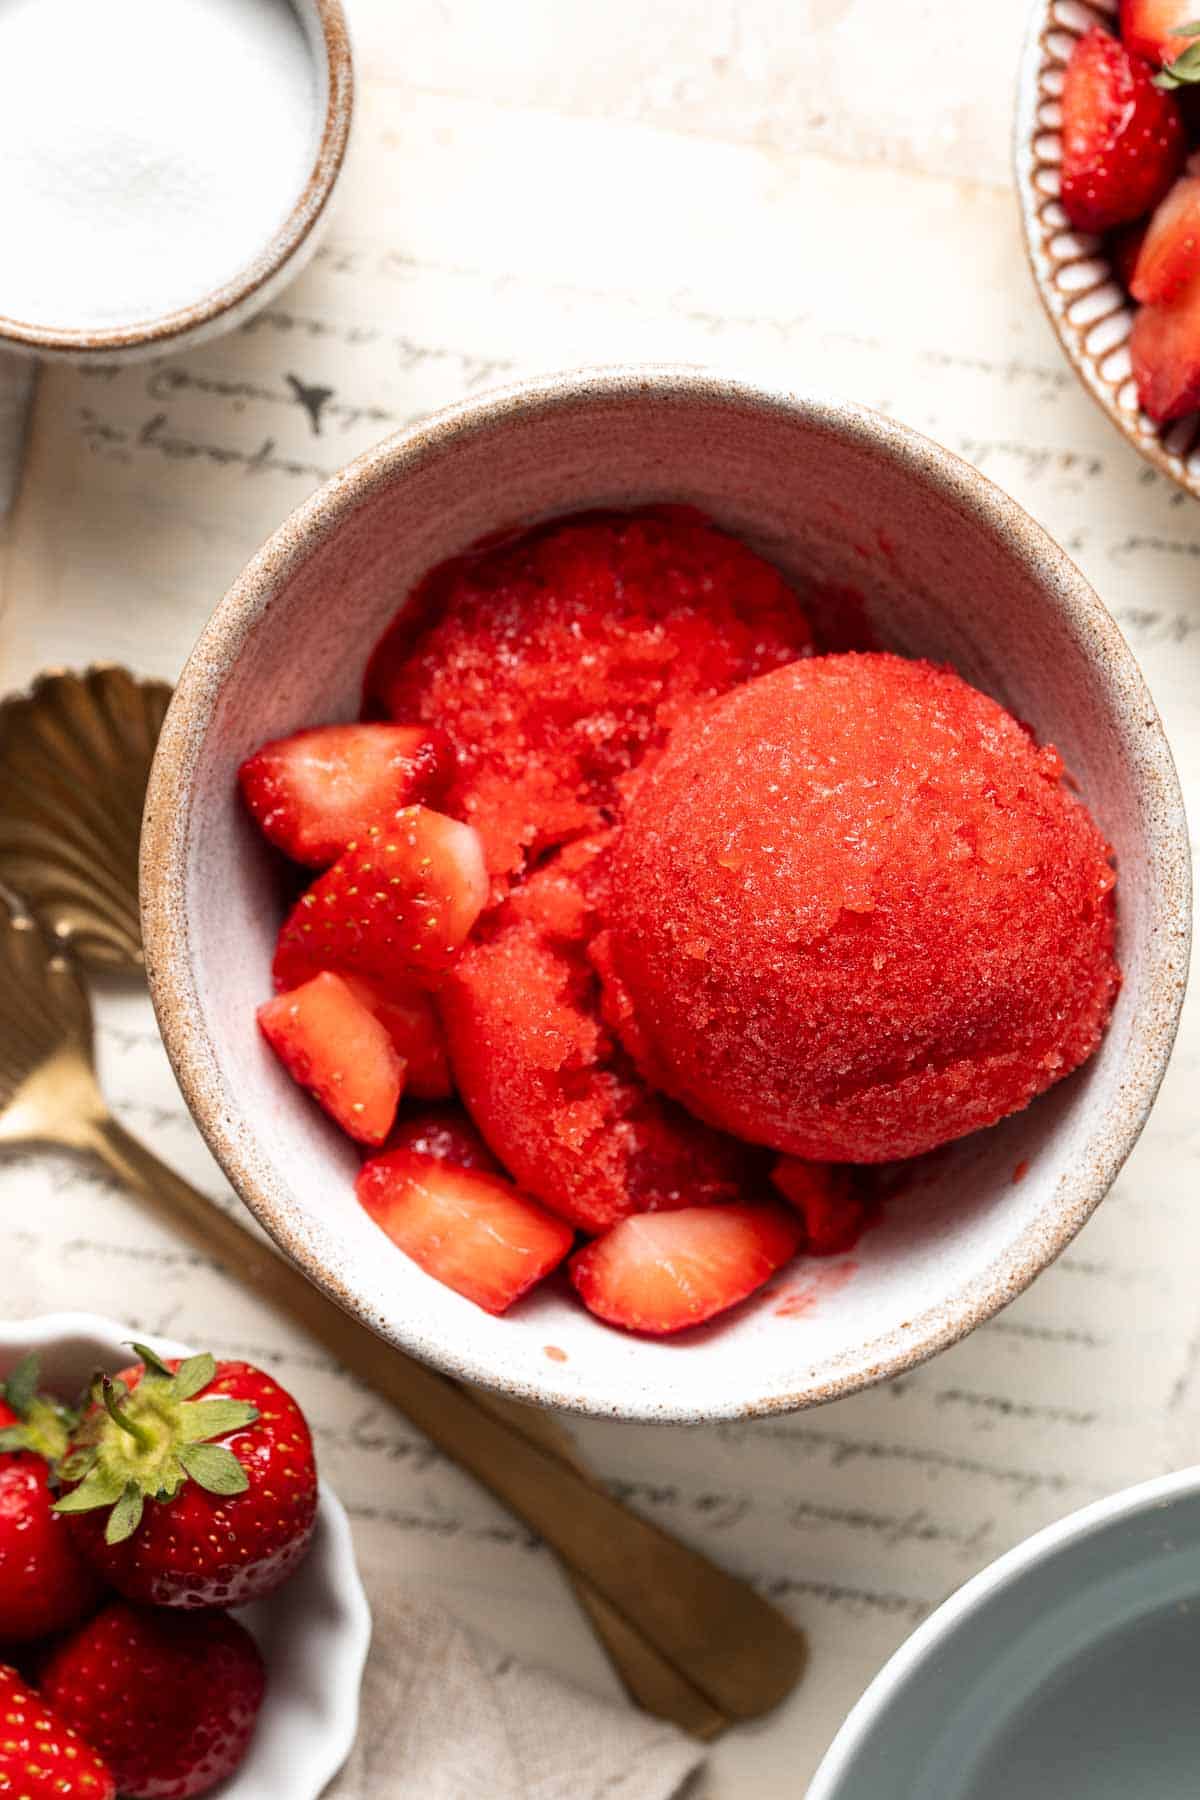 This 3-ingredient Strawberry Sorbet is a refreshing, healthy, vegan, and gluten-free frozen treat to enjoy on a hot day. Plus, no ice cream maker required! | aheadofthyme.com